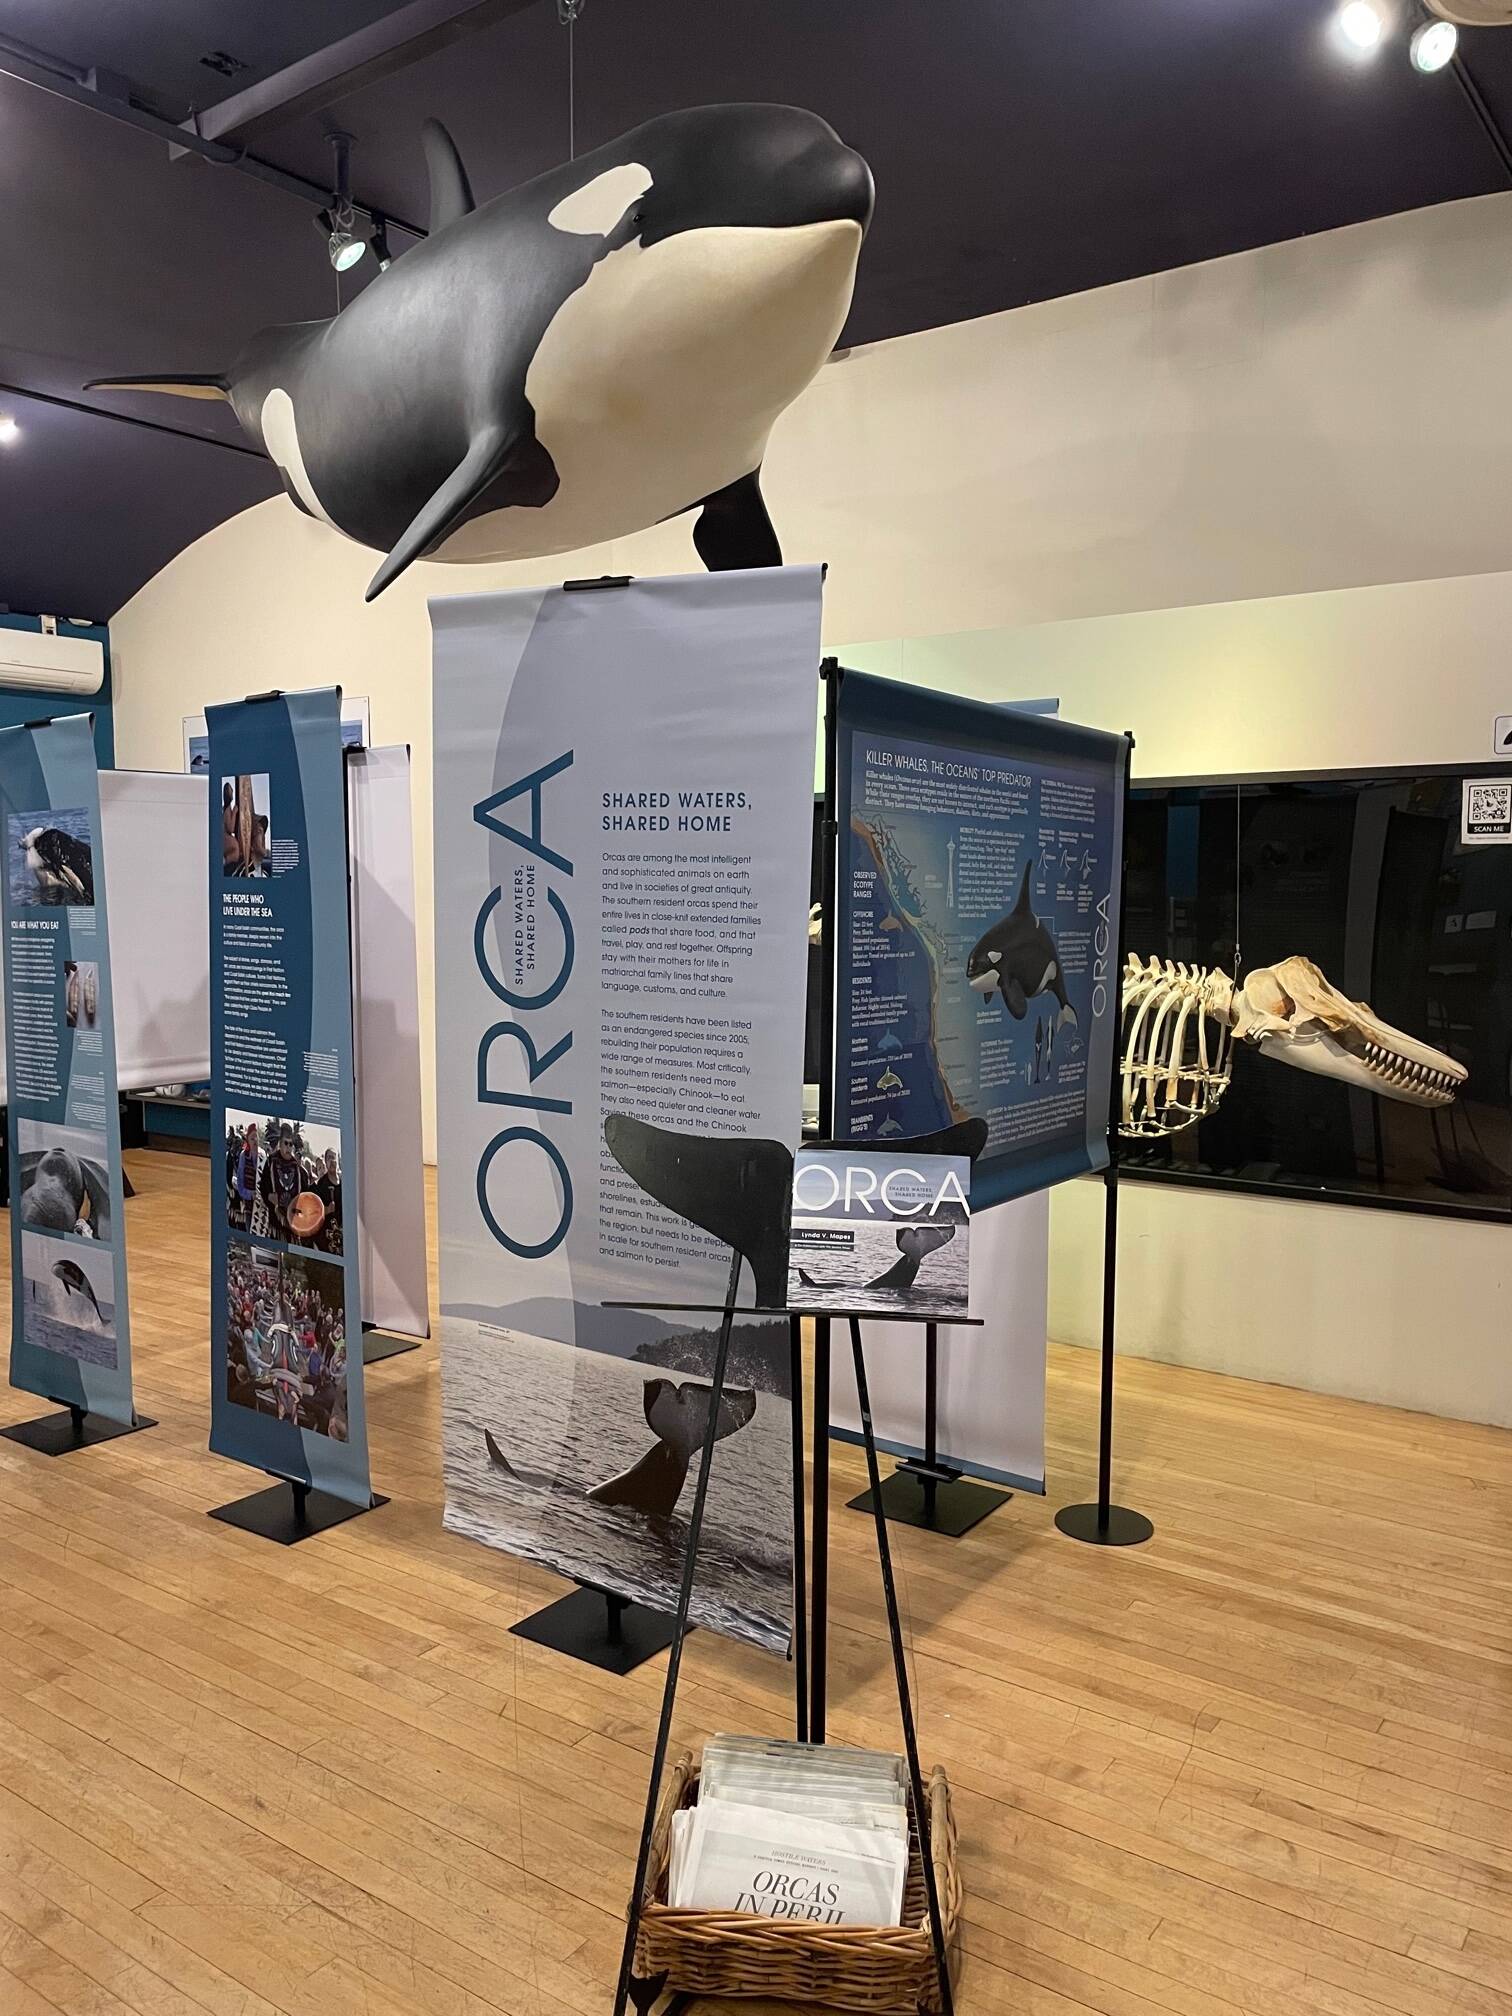 Contributed photo by The Whale Museum
”Orca: Shared Waters, Shared Home” exhibit on display now